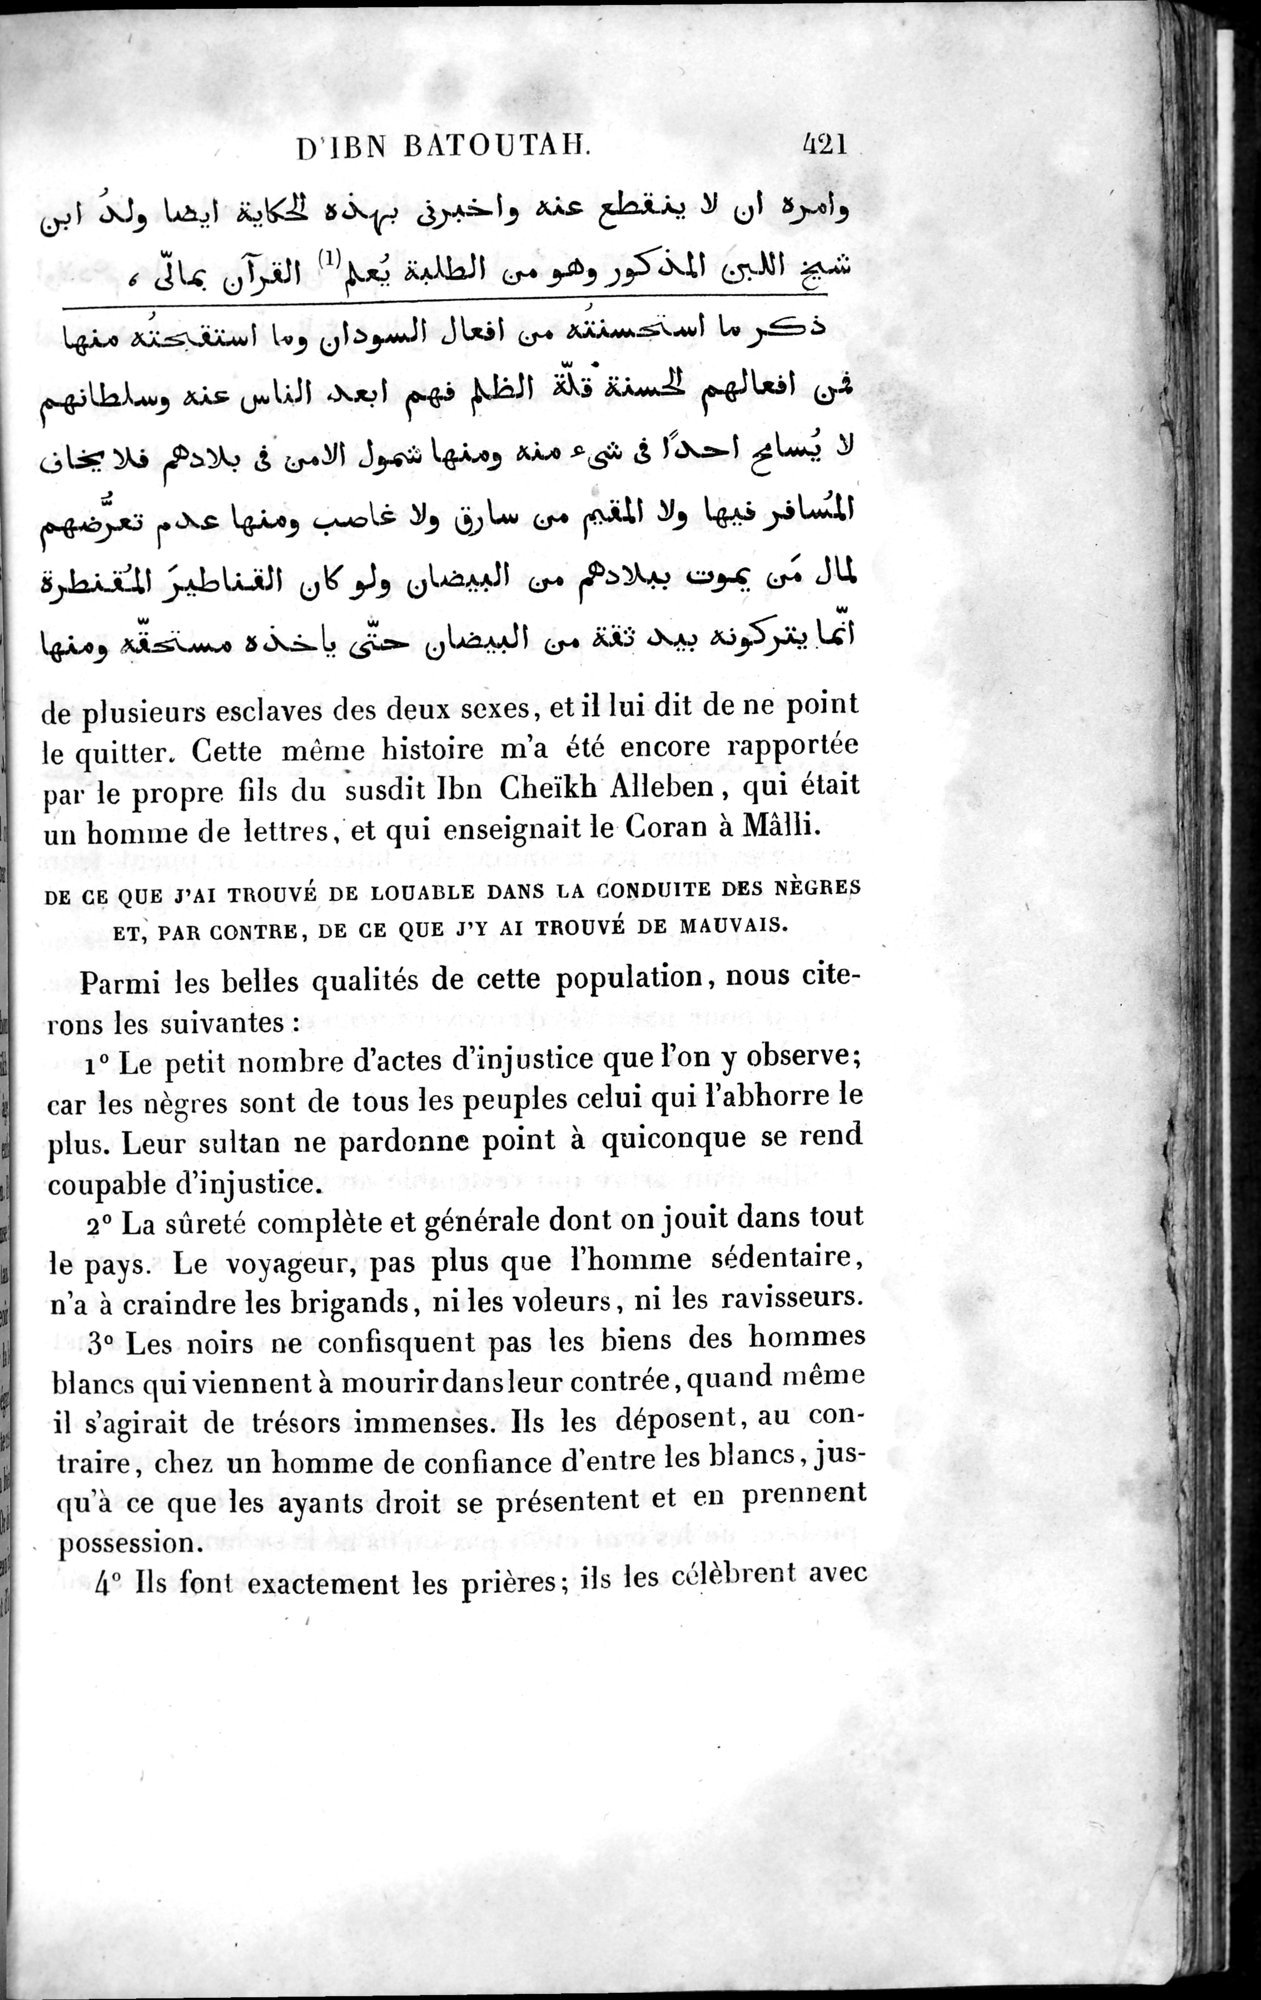 Voyages d'Ibn Batoutah : vol.4 / Page 433 (Grayscale High Resolution Image)